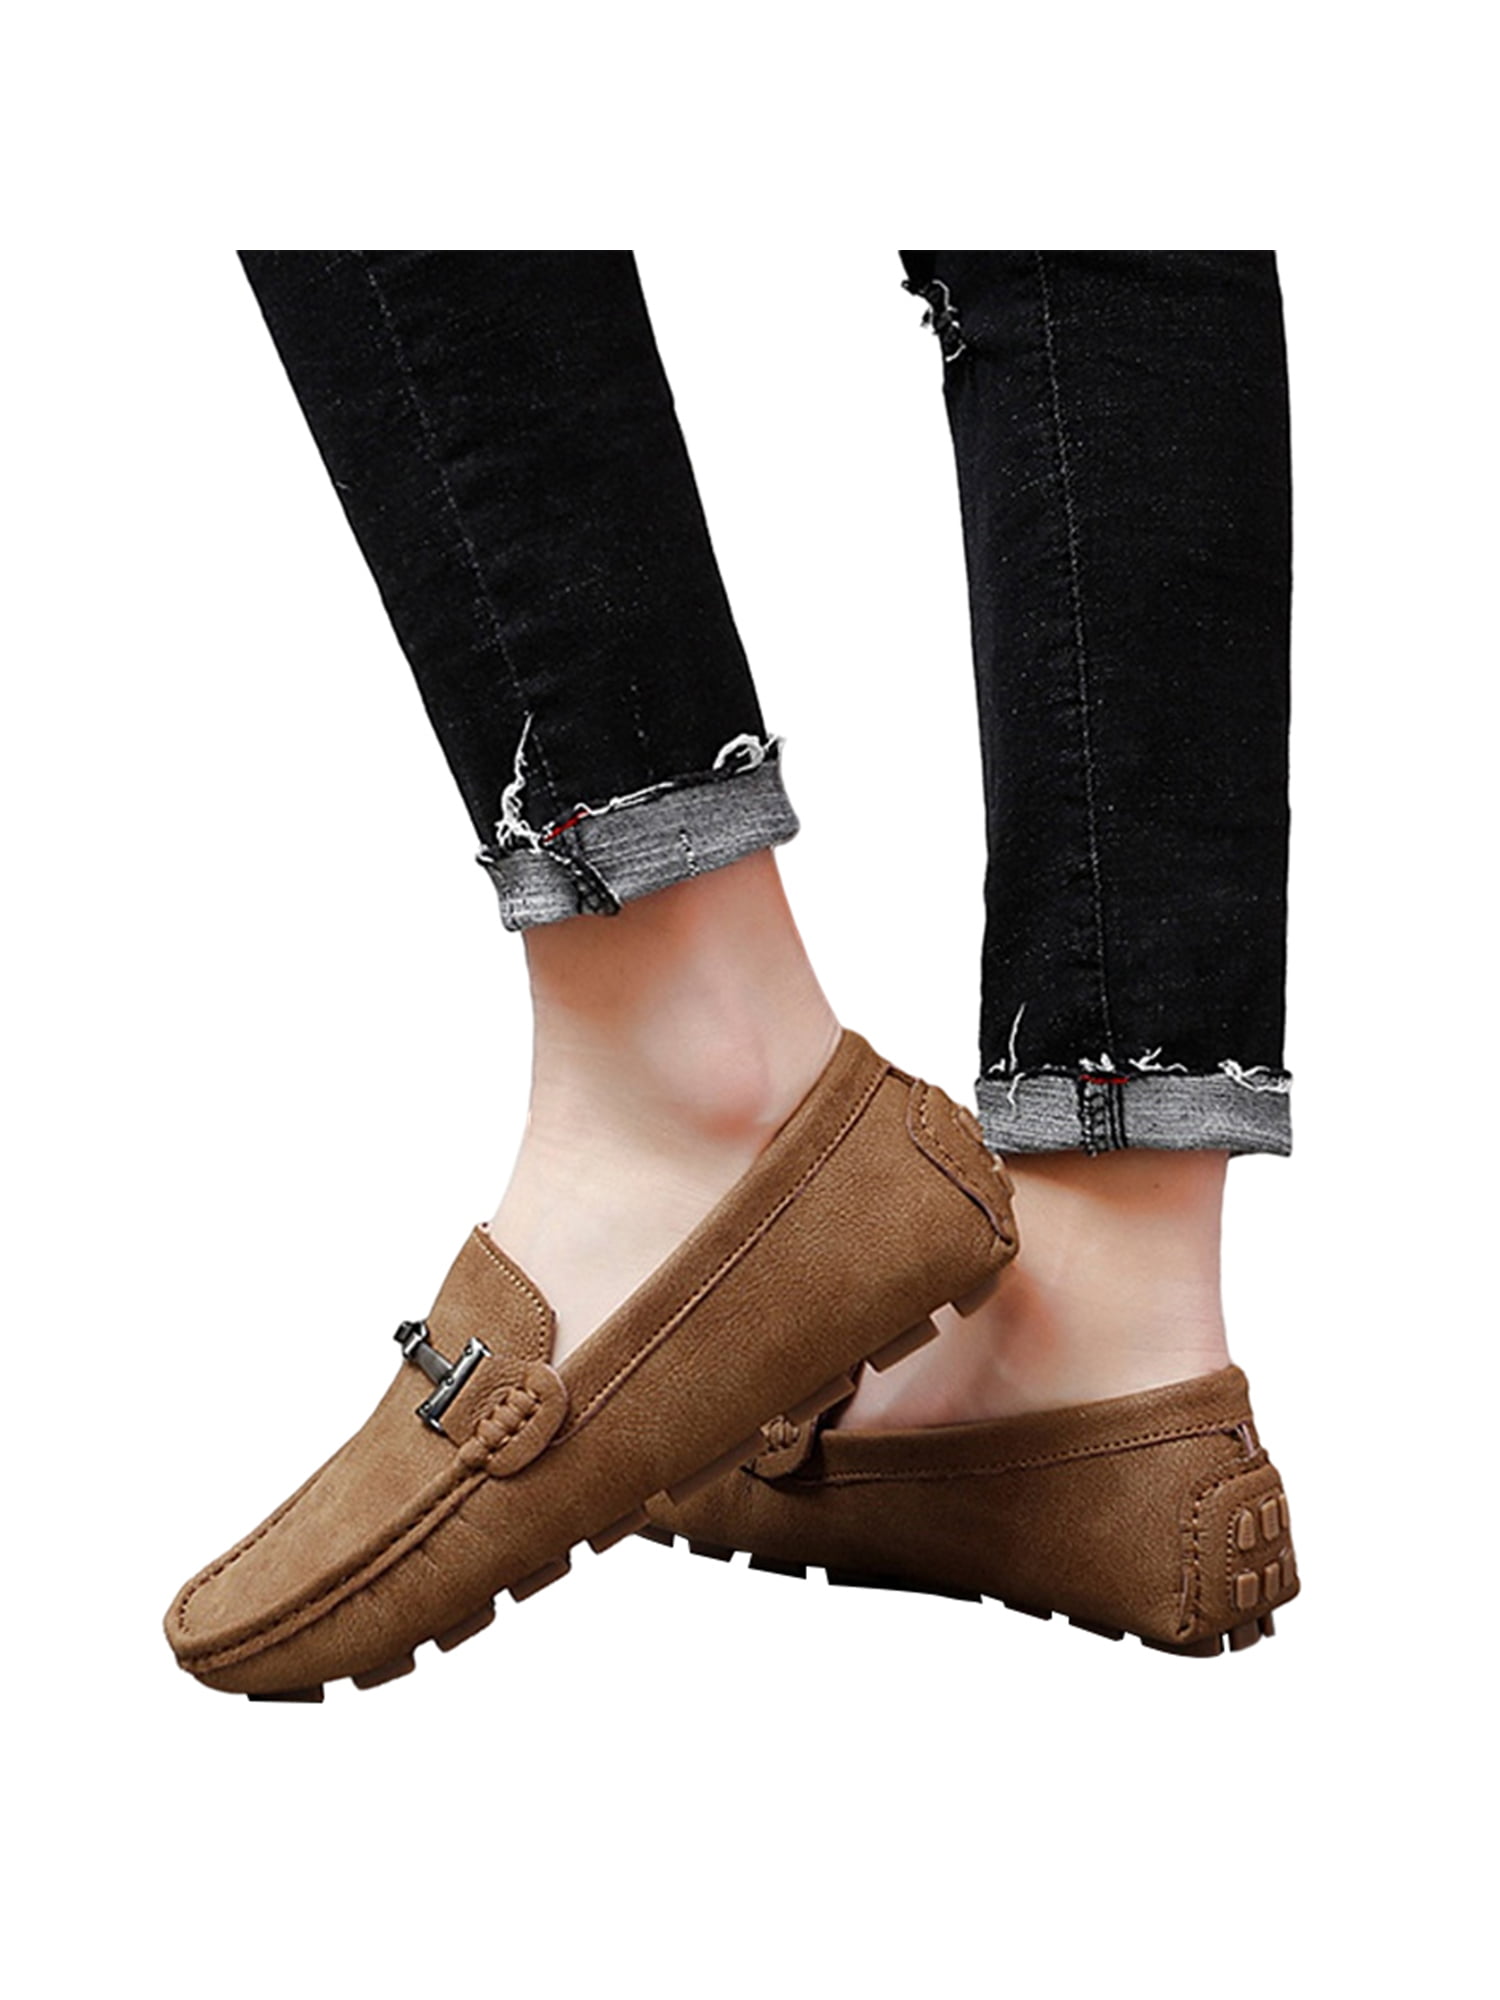 Chic Mens Loafers Faux Leather Slip On Casual Dress Moccasins Shoes Flats Soft T